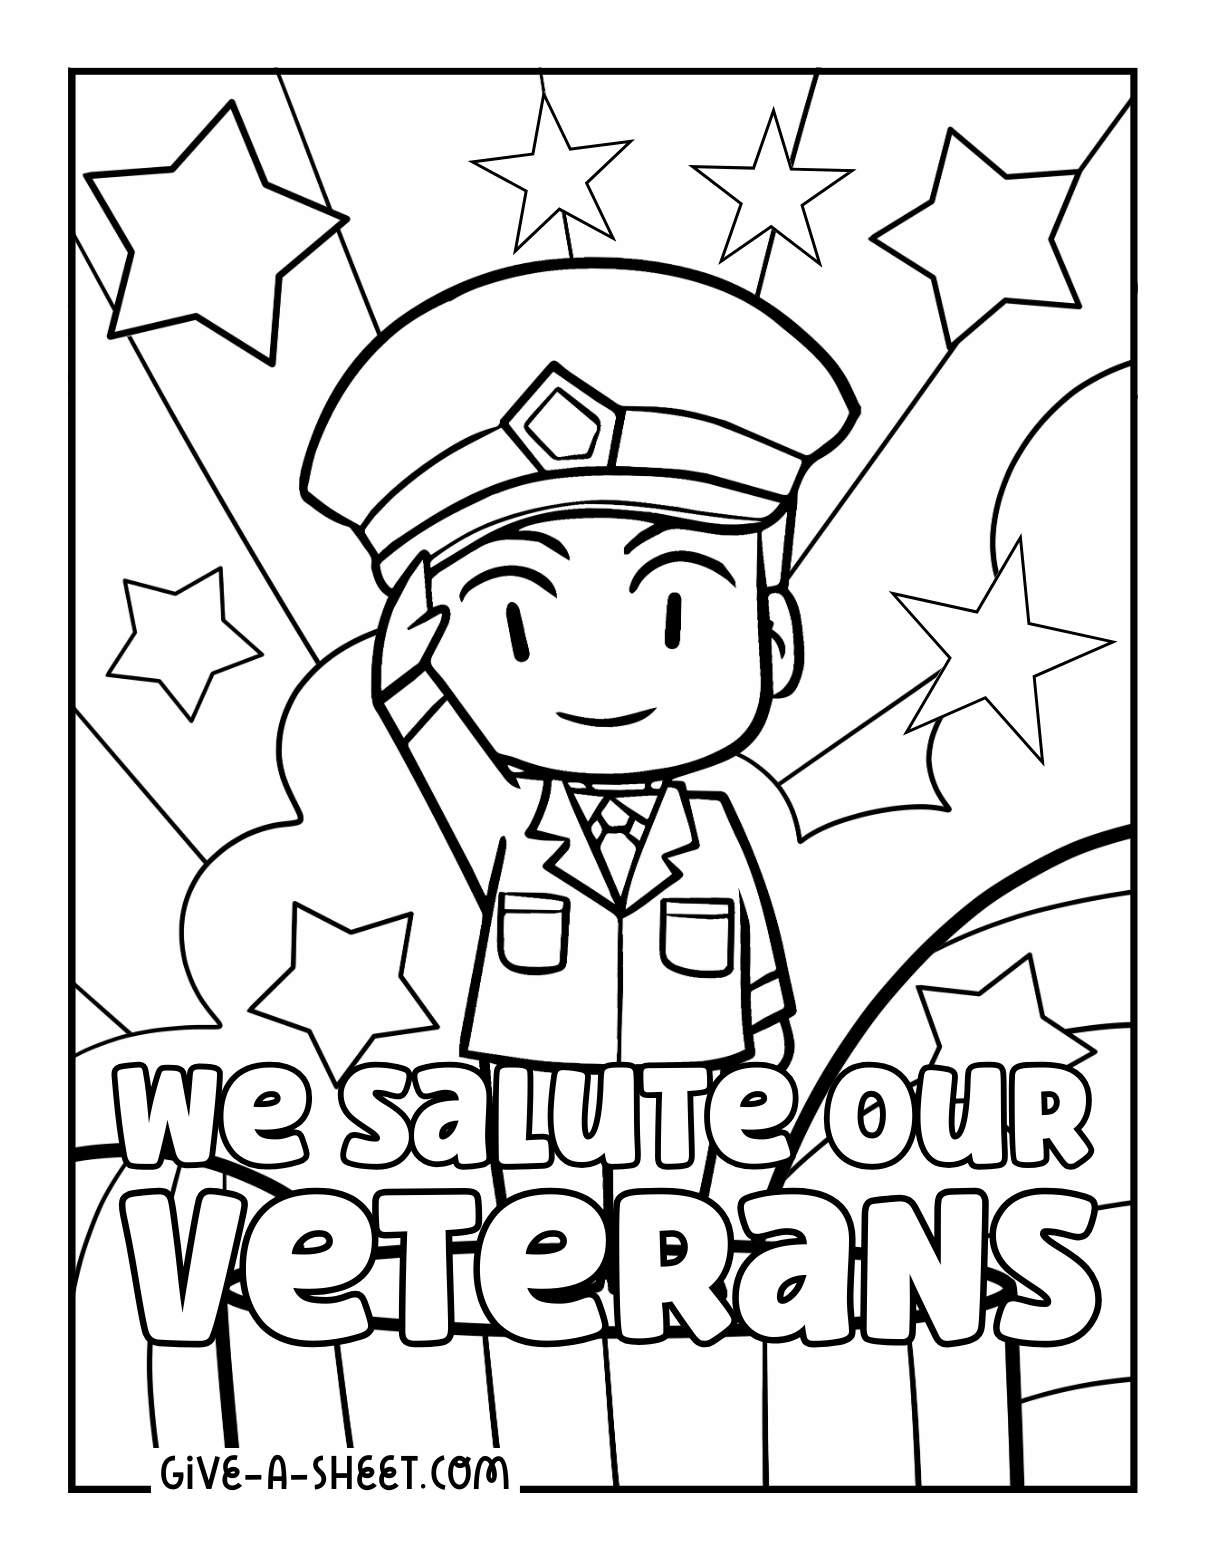 Remembrance of veterans day coloring sheet for kids.